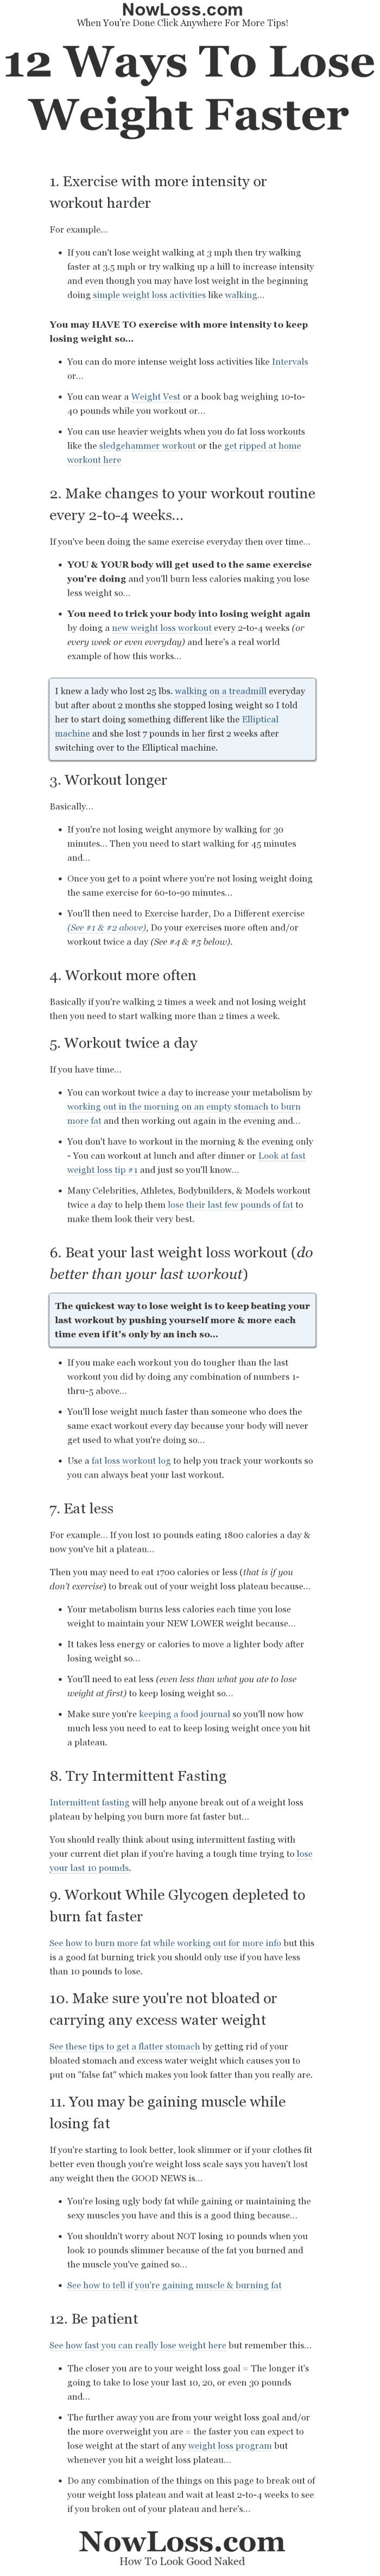 12 ways to lose weight faster or how to break out...